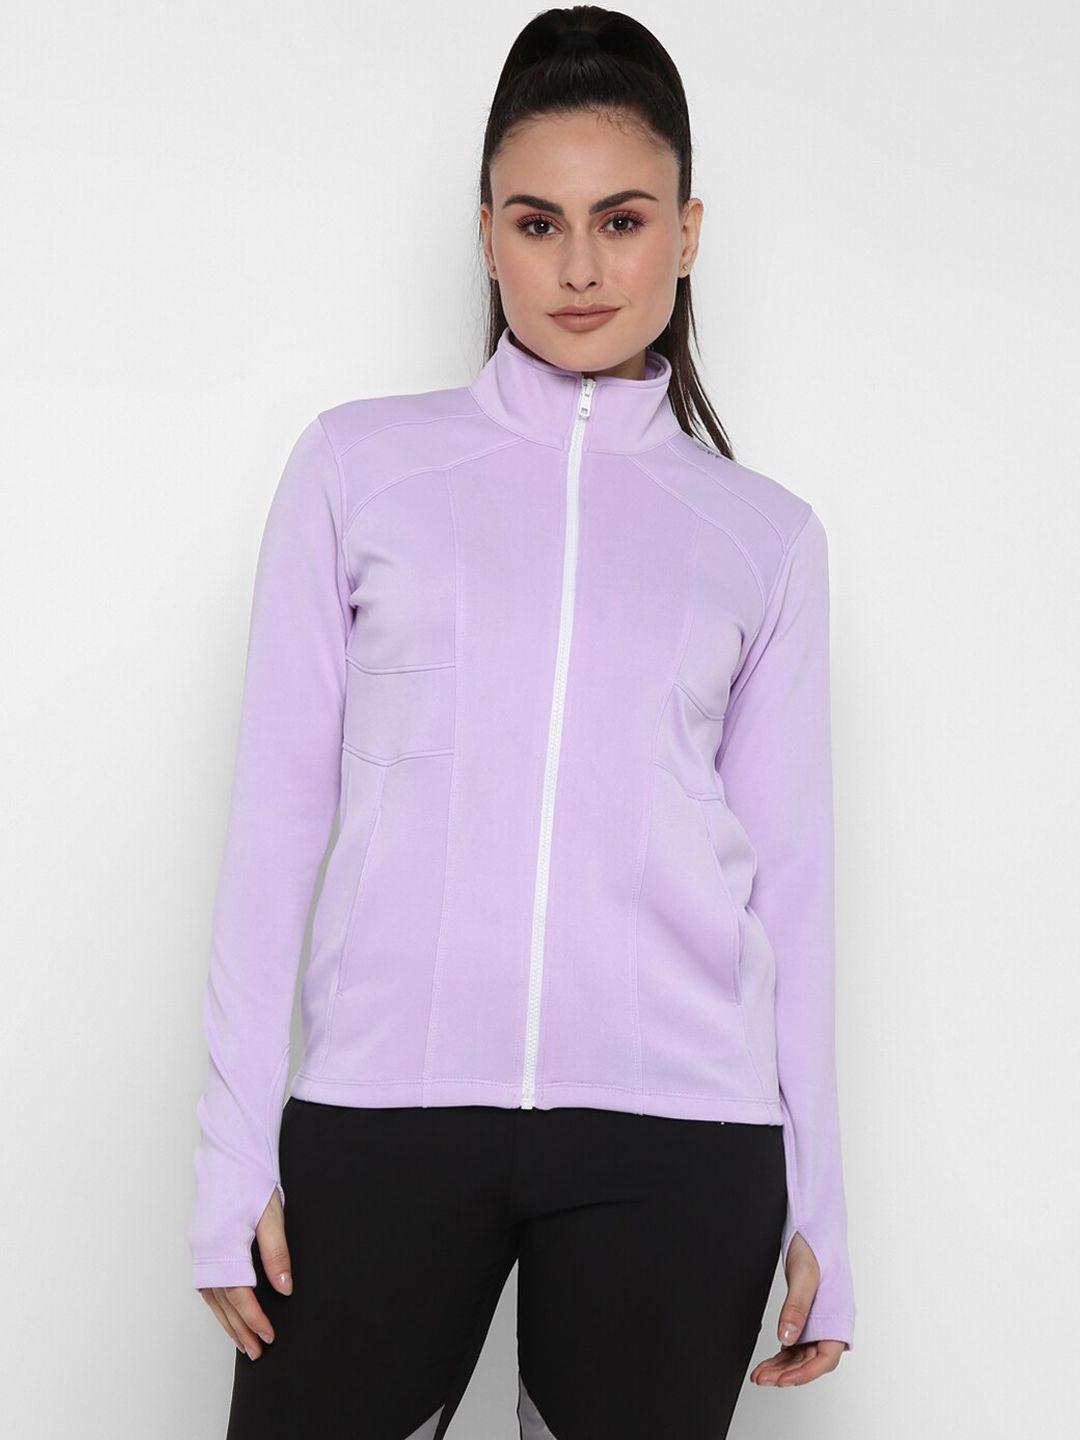 off limits women antimicrobial tailored sports jacket